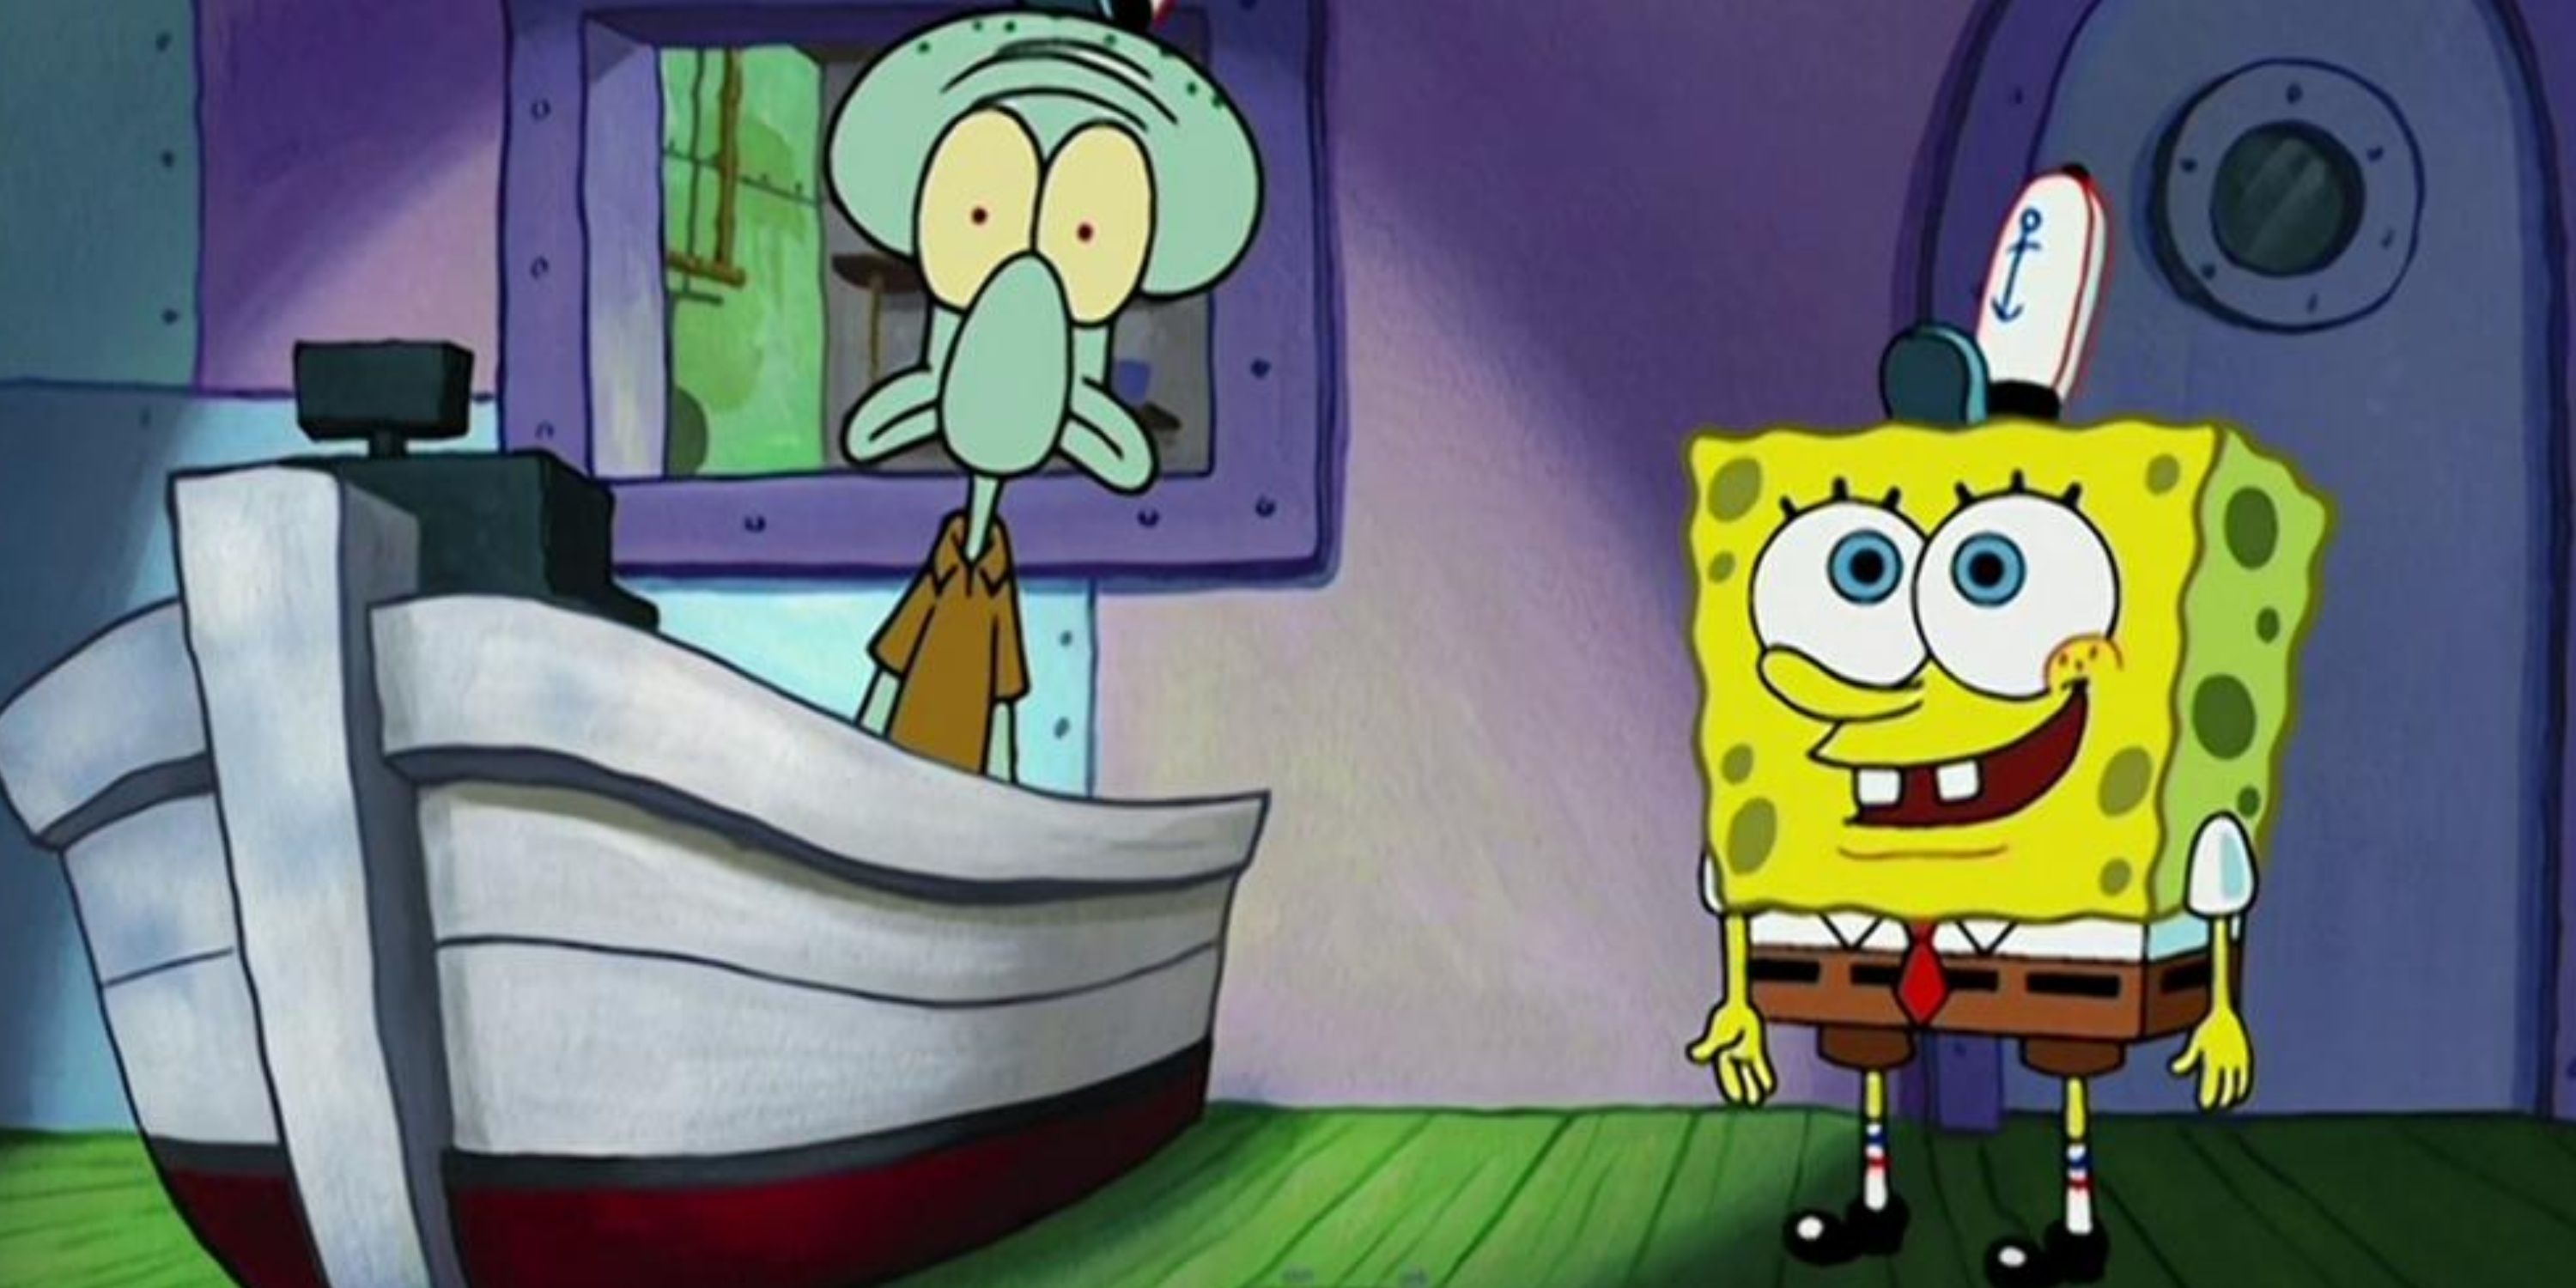 Squidward looking scared and Spongebob smiling in the Graveyard Shift episode